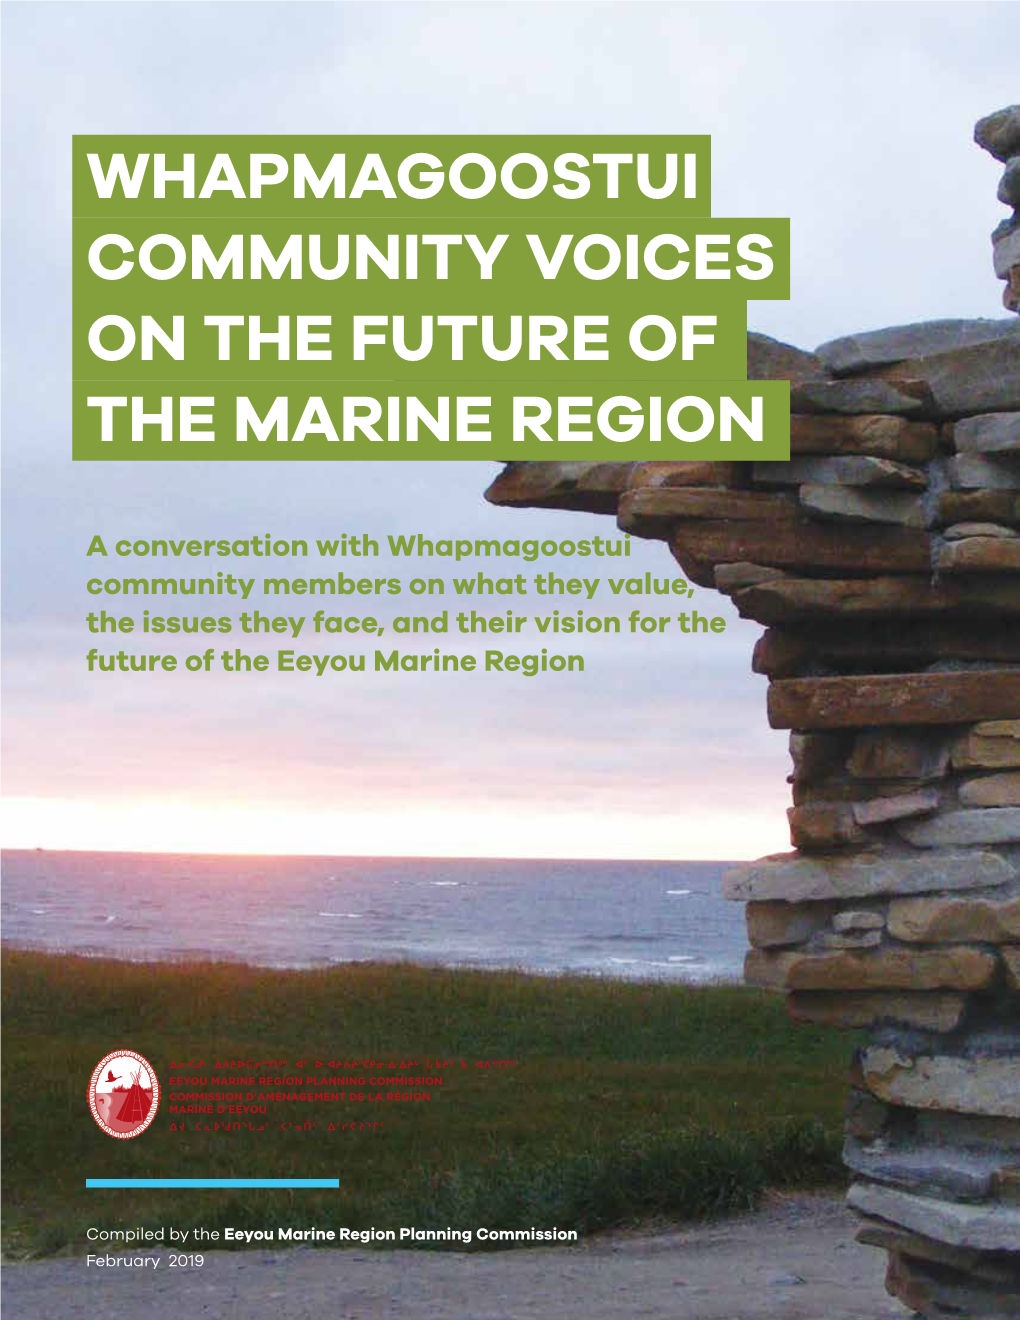 Whapmagoostui Community Voices on the Future of the Marine Region